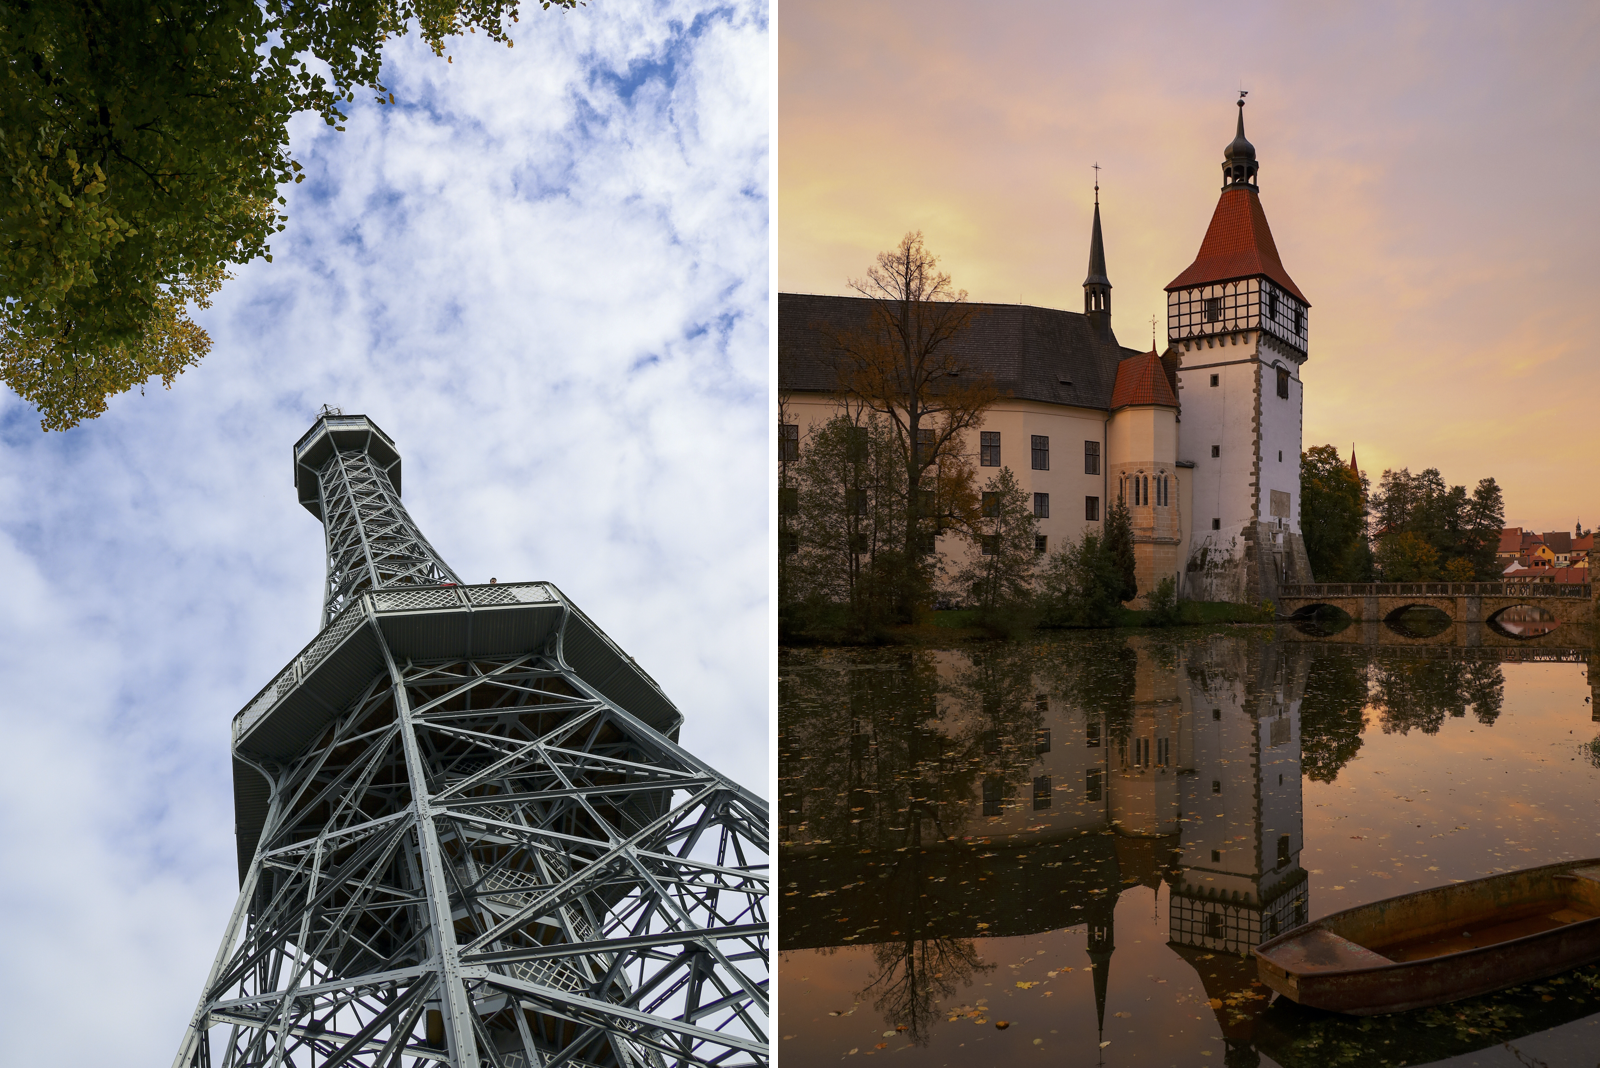 Tours of Castle Blatná and Petřín Lookout Tower are two things to do in Prague 